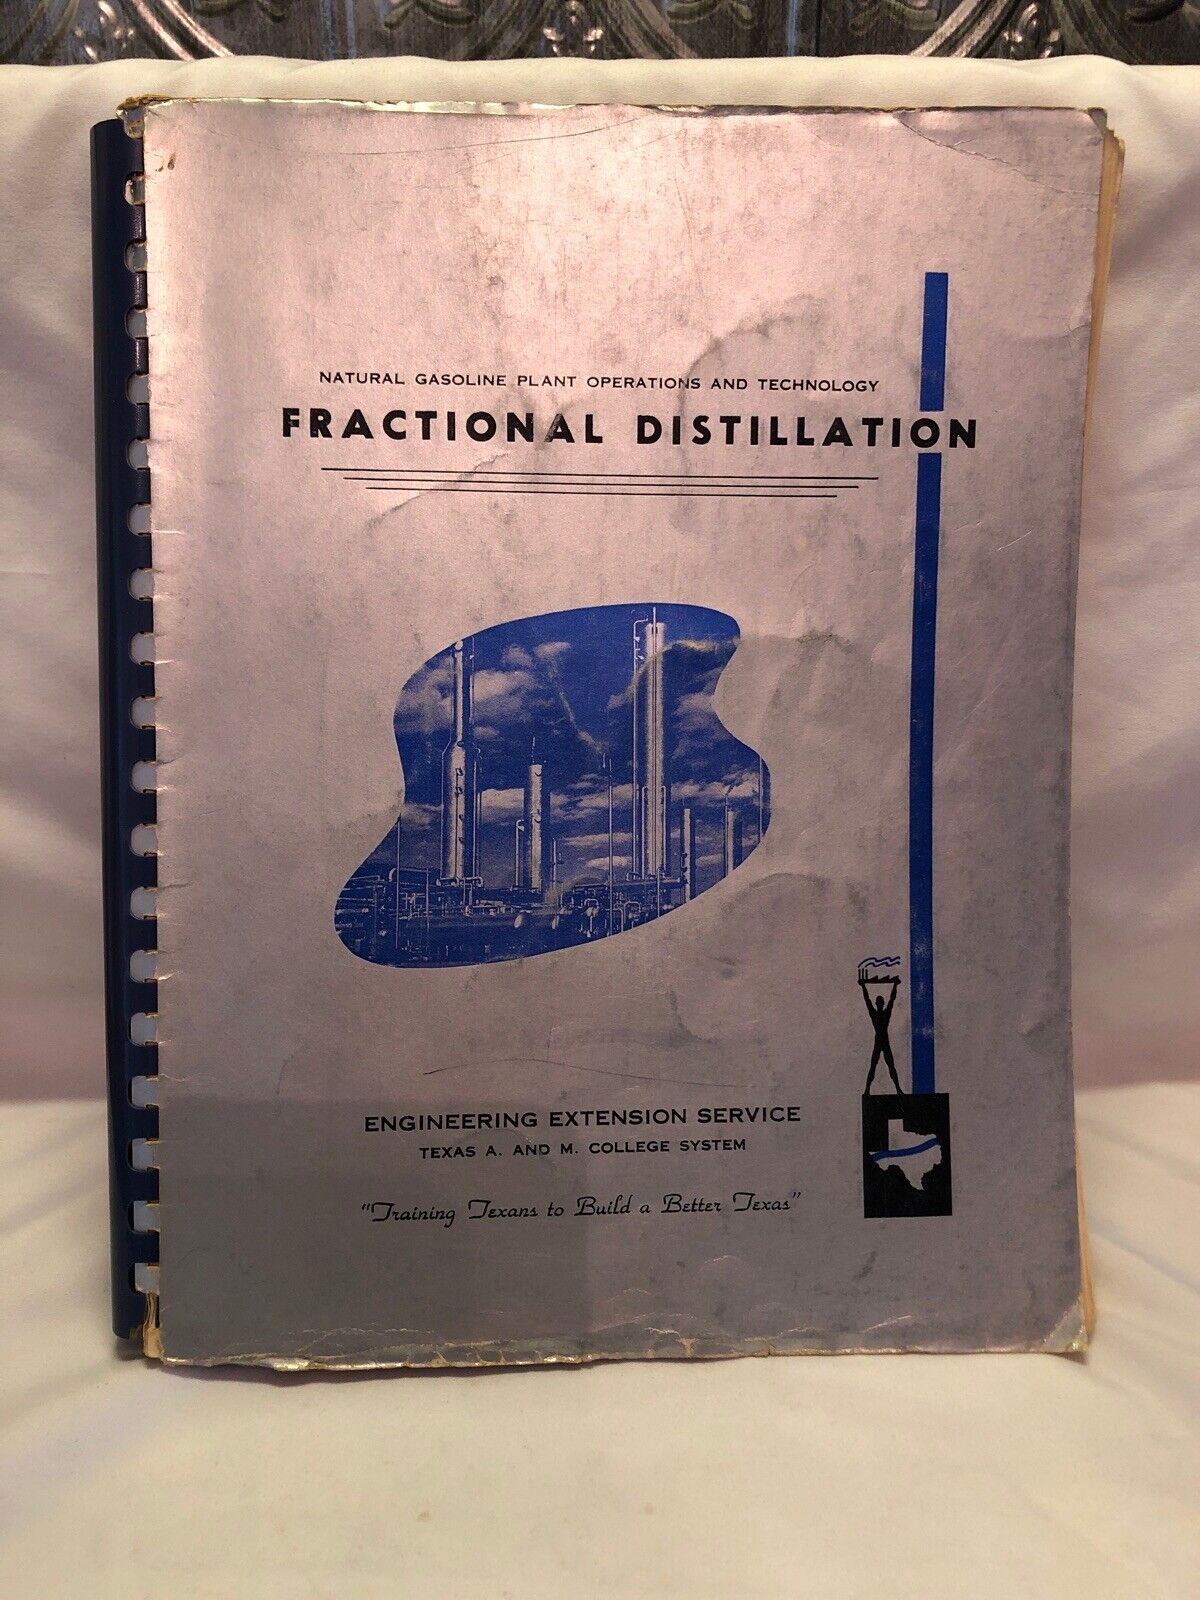 1958 Fractional Distillation (Texas A&M College System) by P. Albert Washer